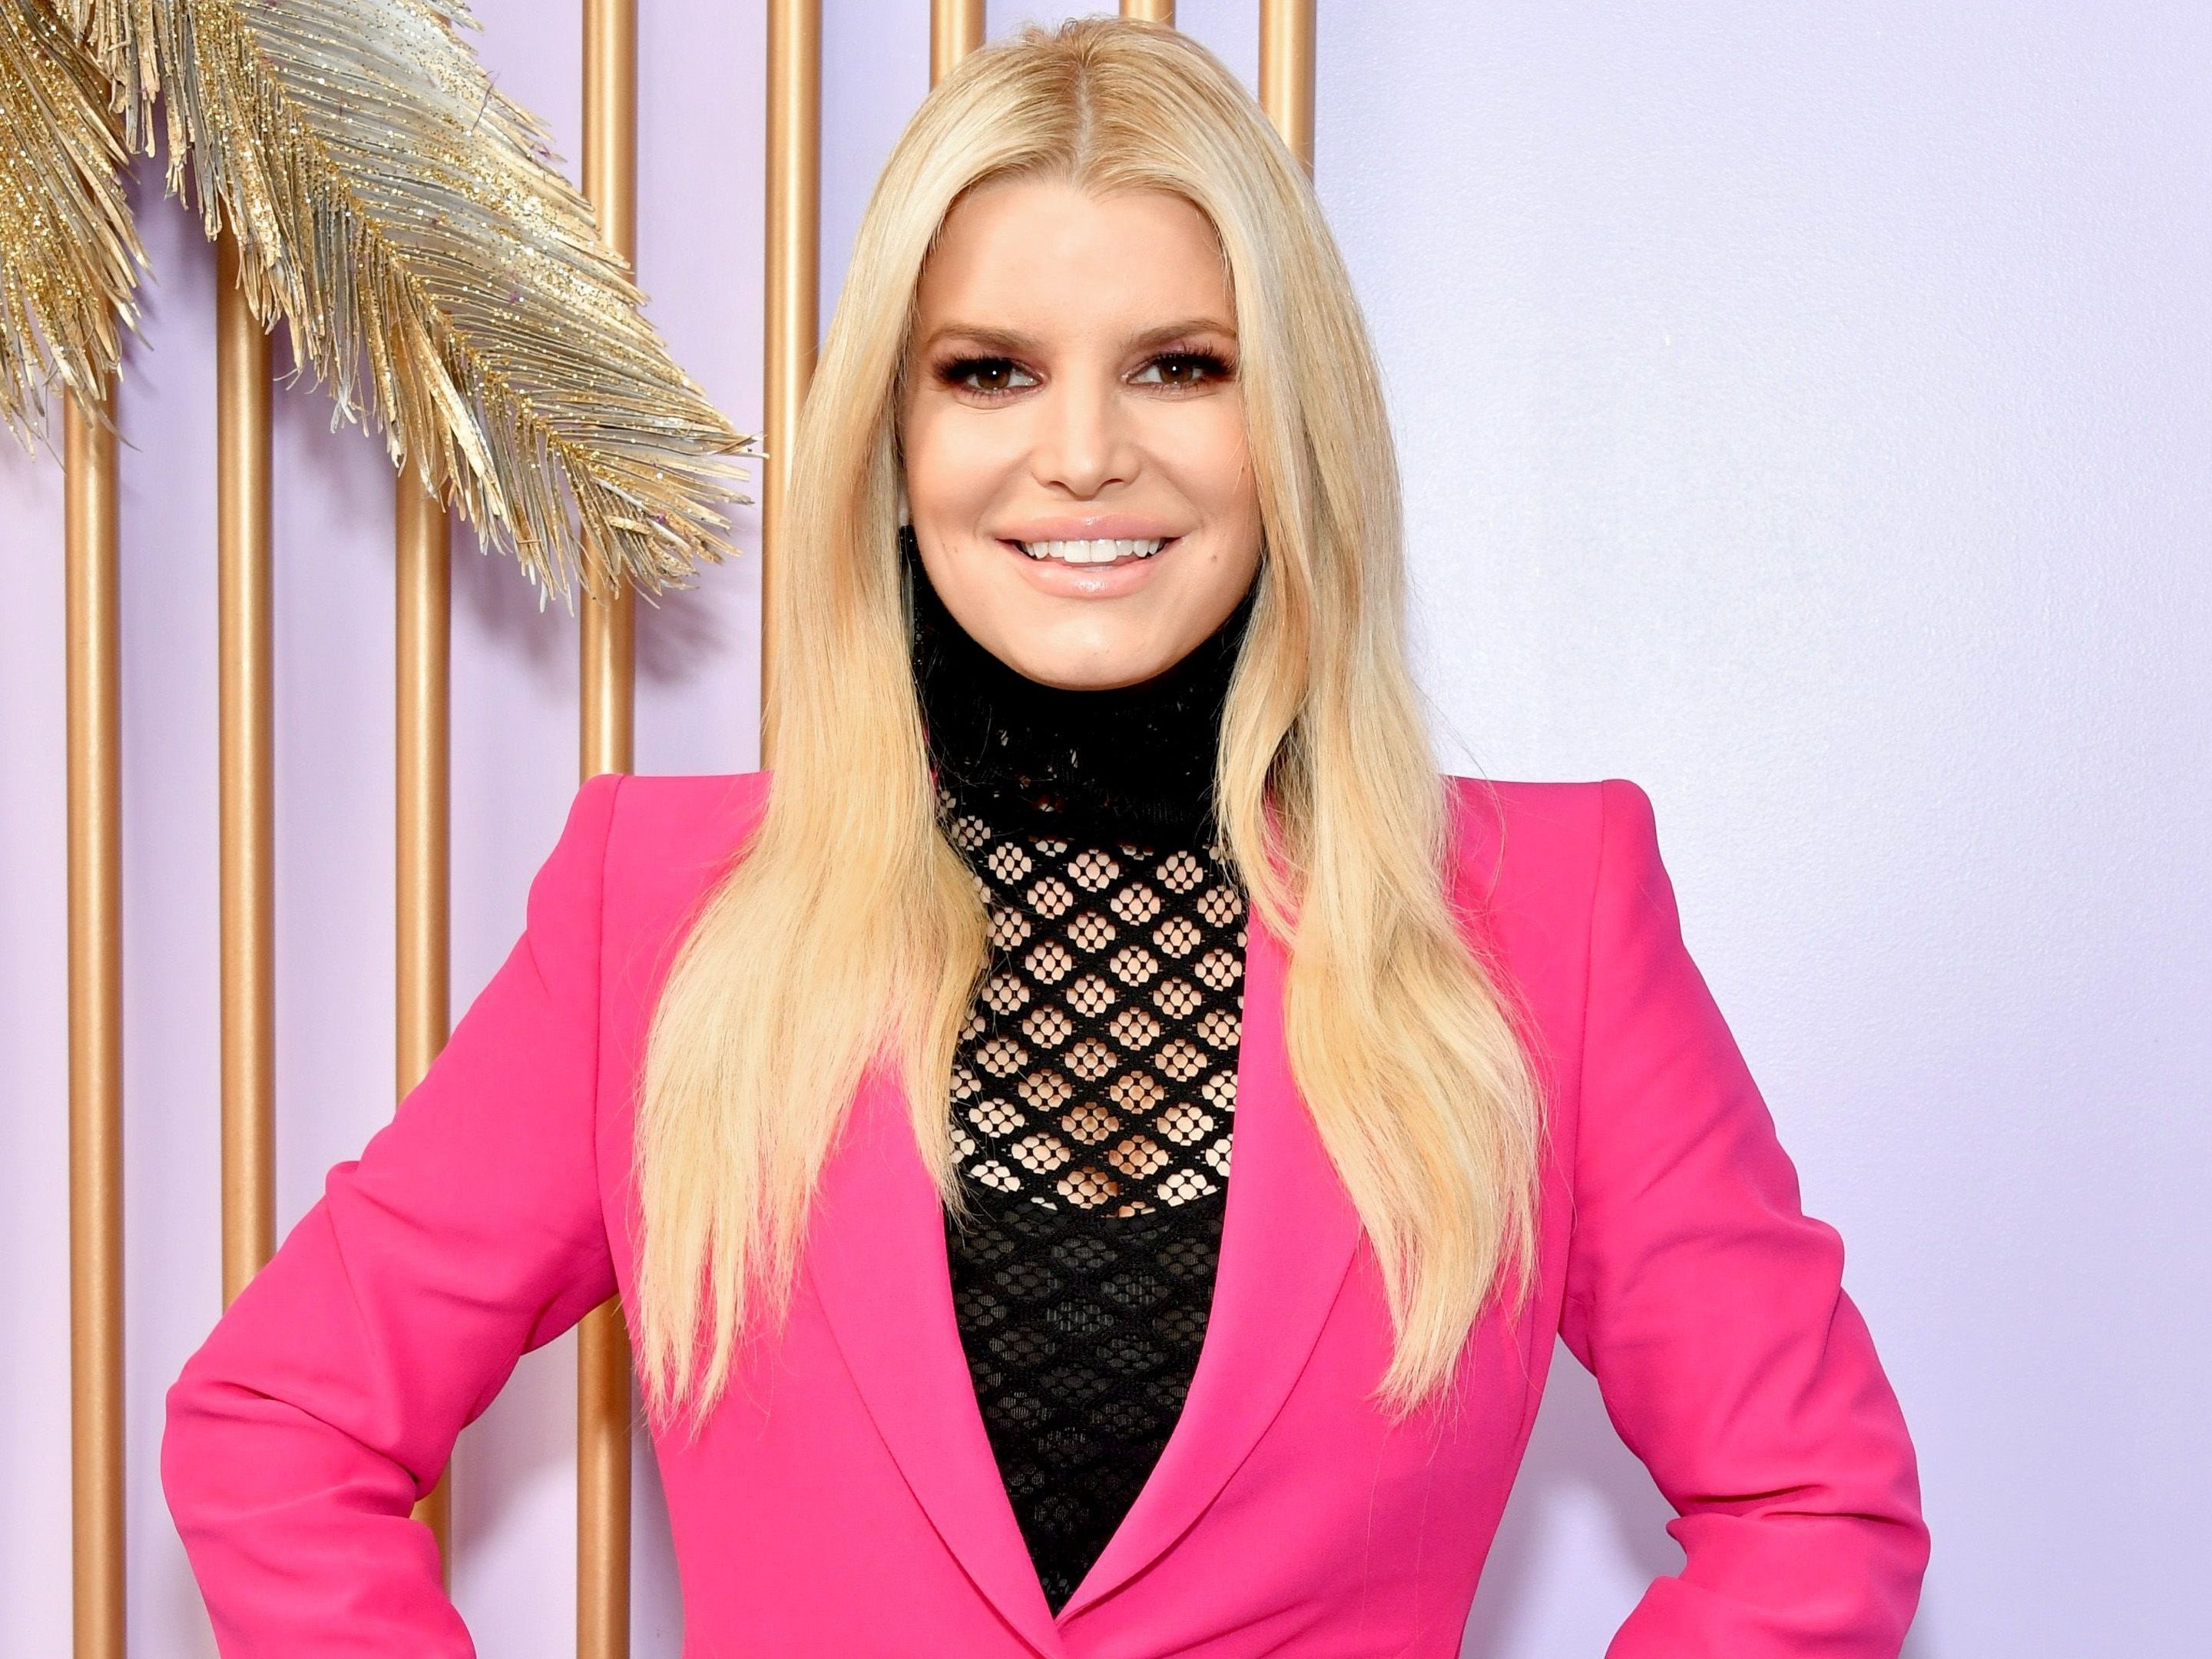 Jessica Simpson flaunts physique in bikini after 100-pound weight loss